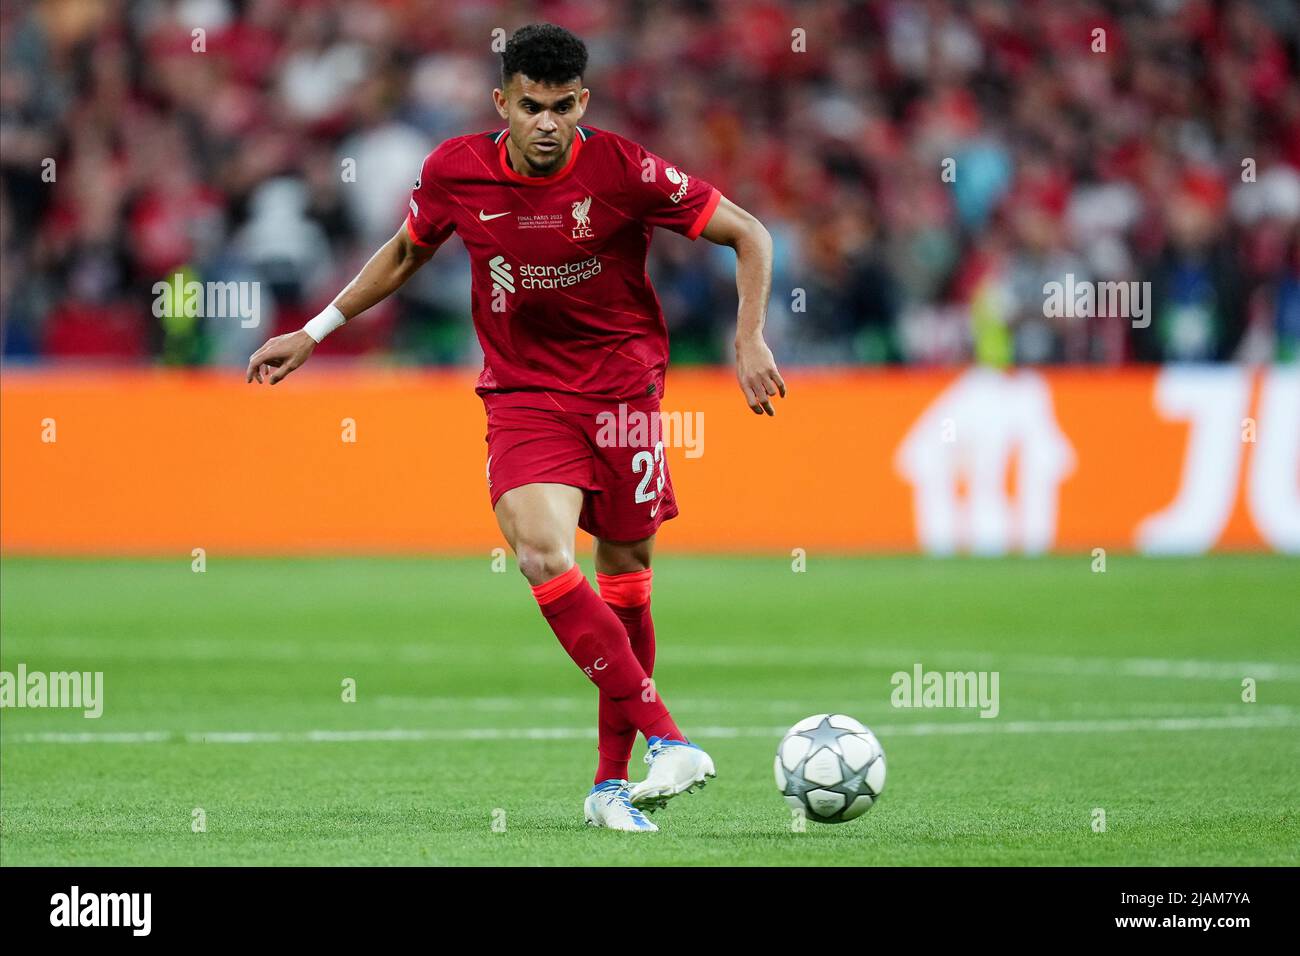 Luis Diaz of Liverpool FC during the UEFA Champions League Final match between Liverpool FC and Real Madrid played at Stade de France on May 28, 2022 in Paris, France. (Photo by Magma) Stock Photo